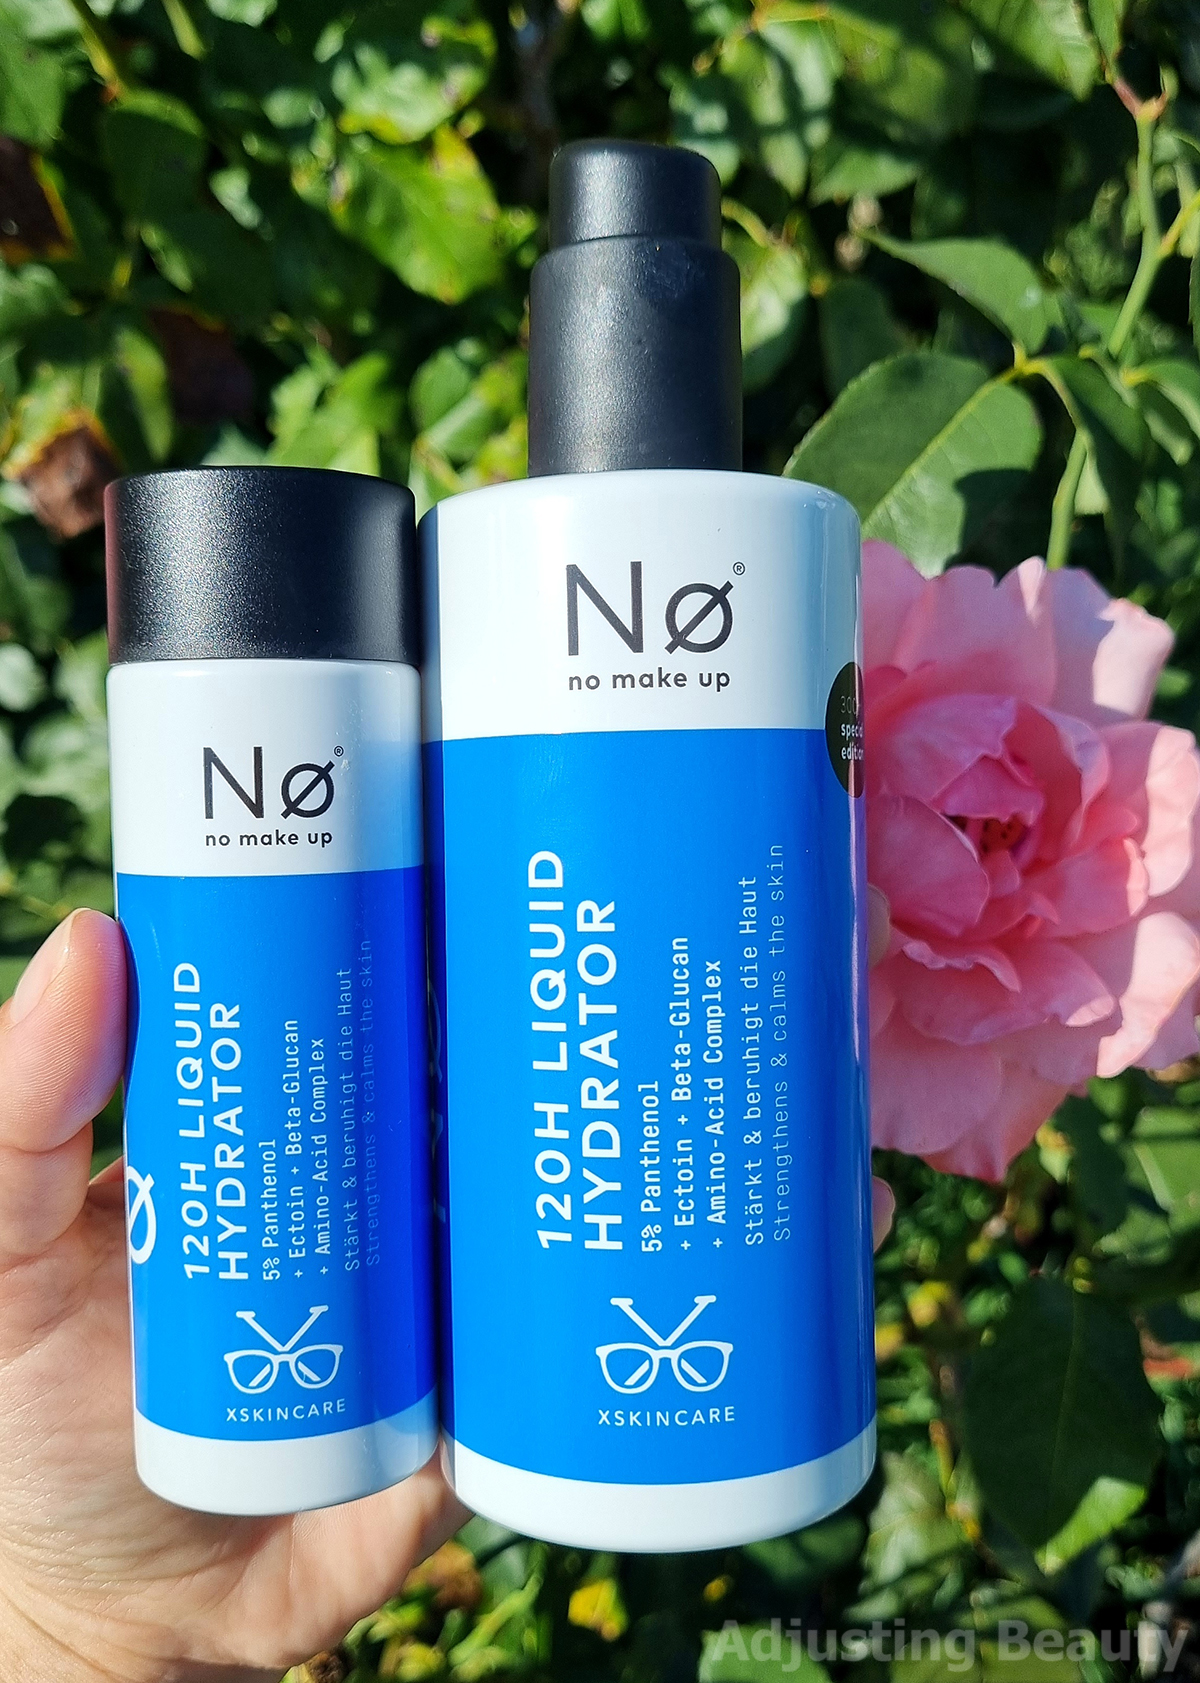 Afsnijden Kabelbaan Taille Review: Nø Cosmetics No Make Up 120H Liquid Hydrator - Adjusting Beauty